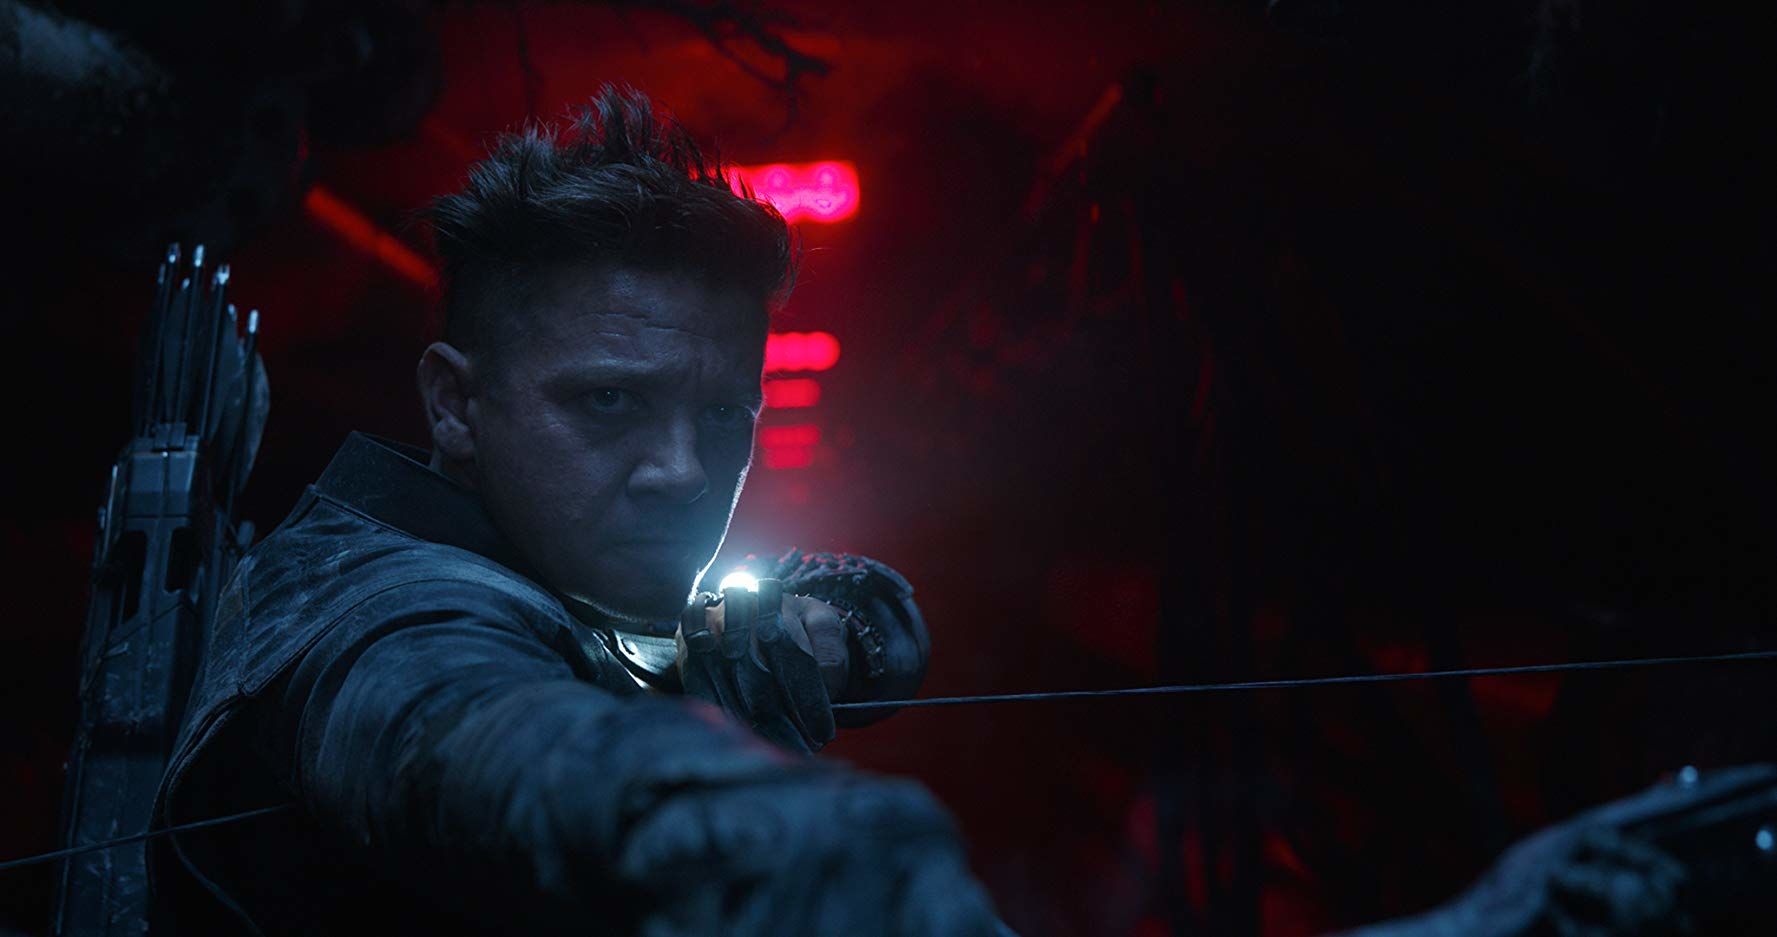 Jeremy Renner channels Hawkeye with Amazon lineup featuring bow and arrow